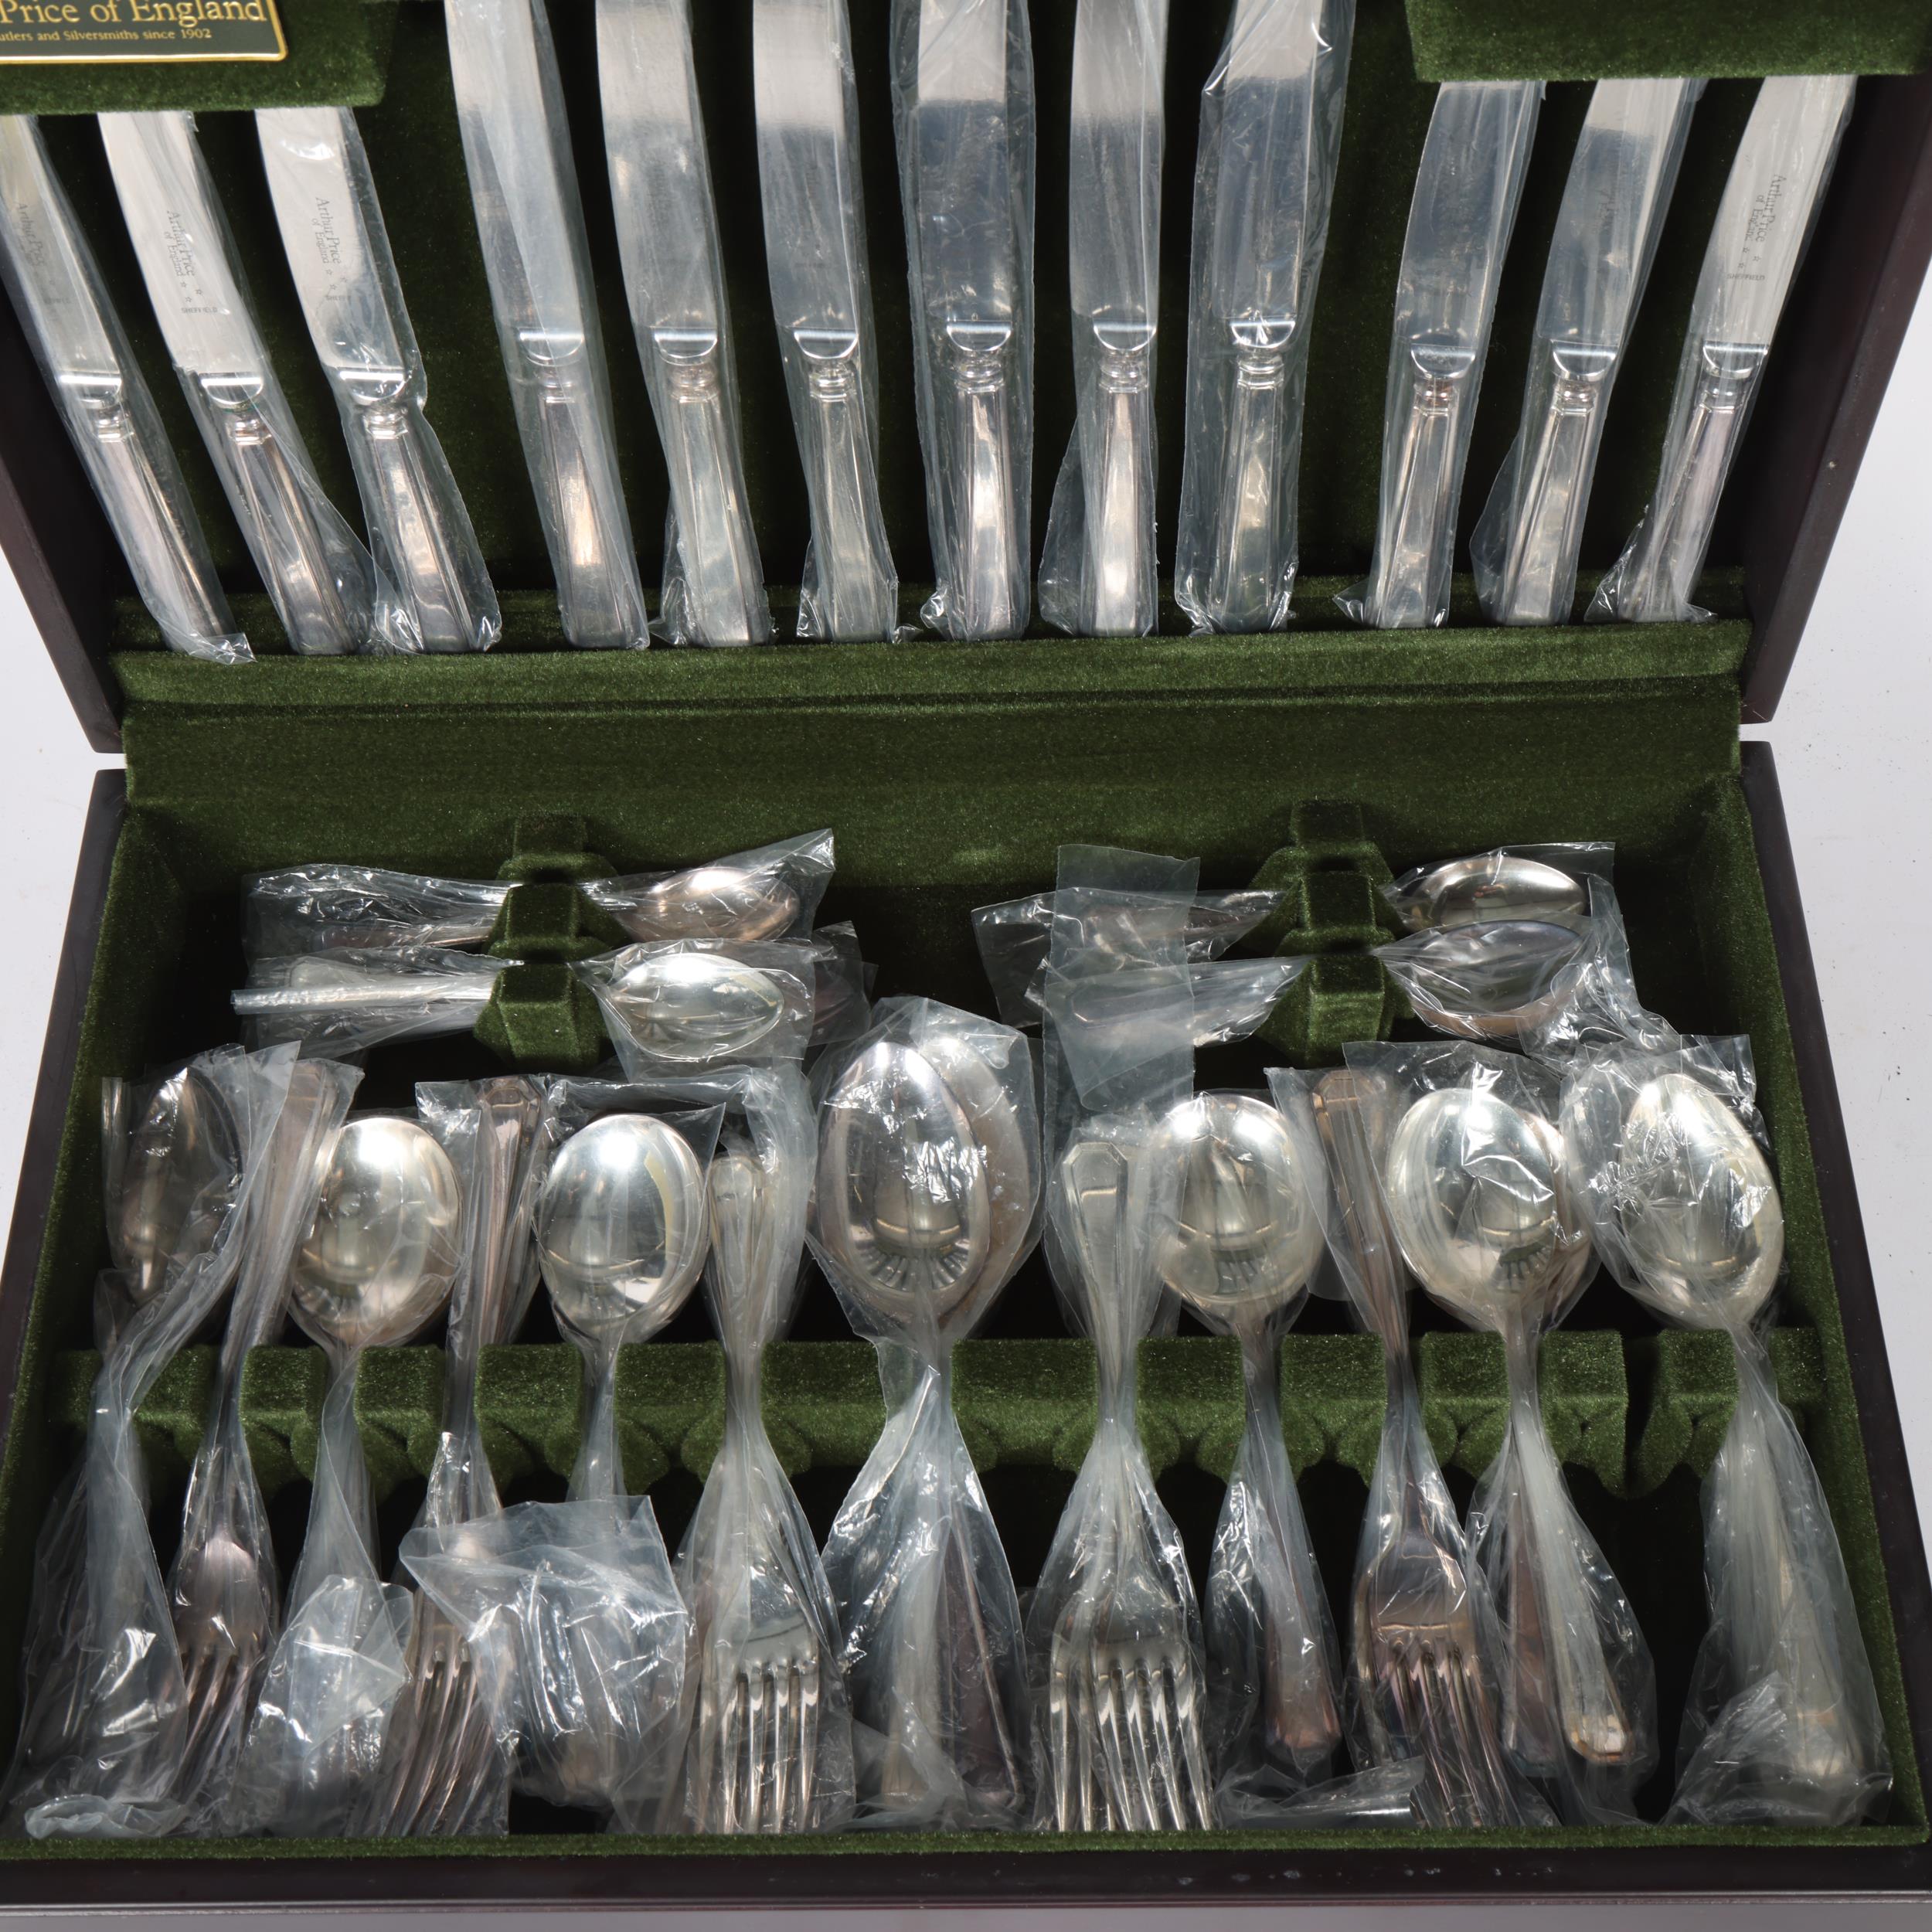 ARTHUR PRICE OF ENGLAND - a new and unused 44-piece canteen of cutlery, in fitted canteen, - Image 2 of 2